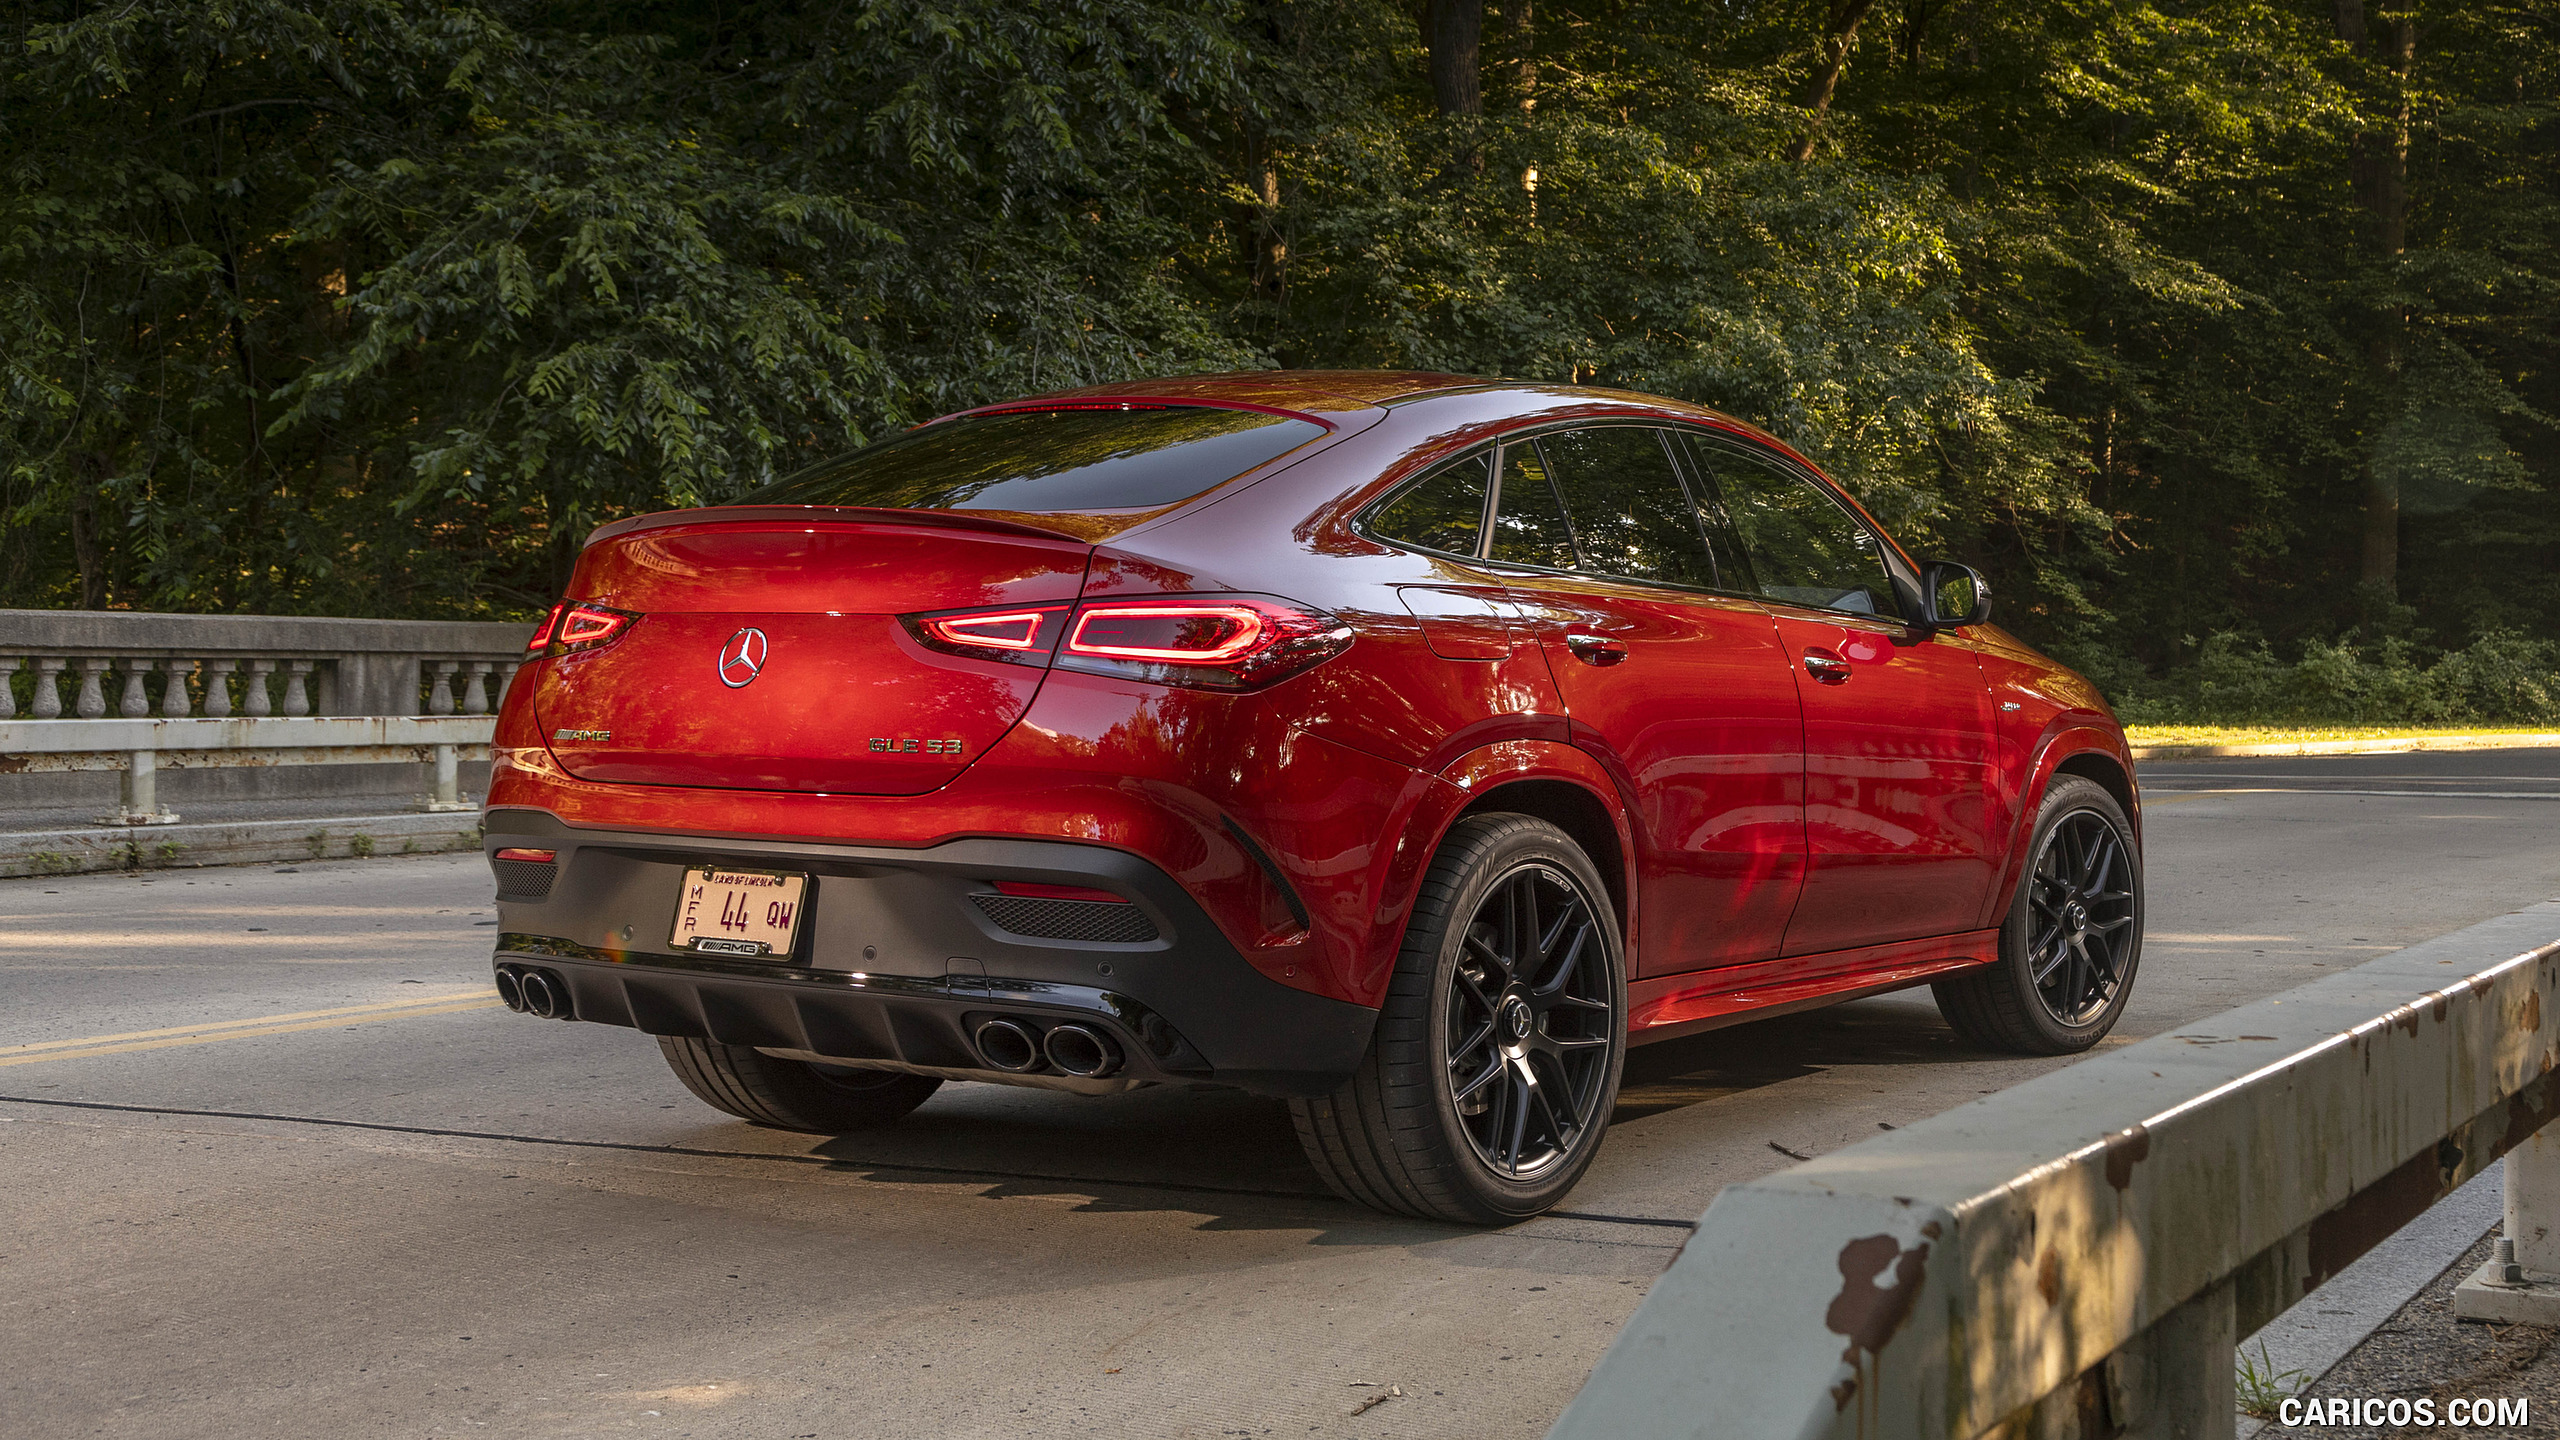 2021 Mercedes-AMG GLE 53 Coupe - Rear Three-Quarter, #137 of 178